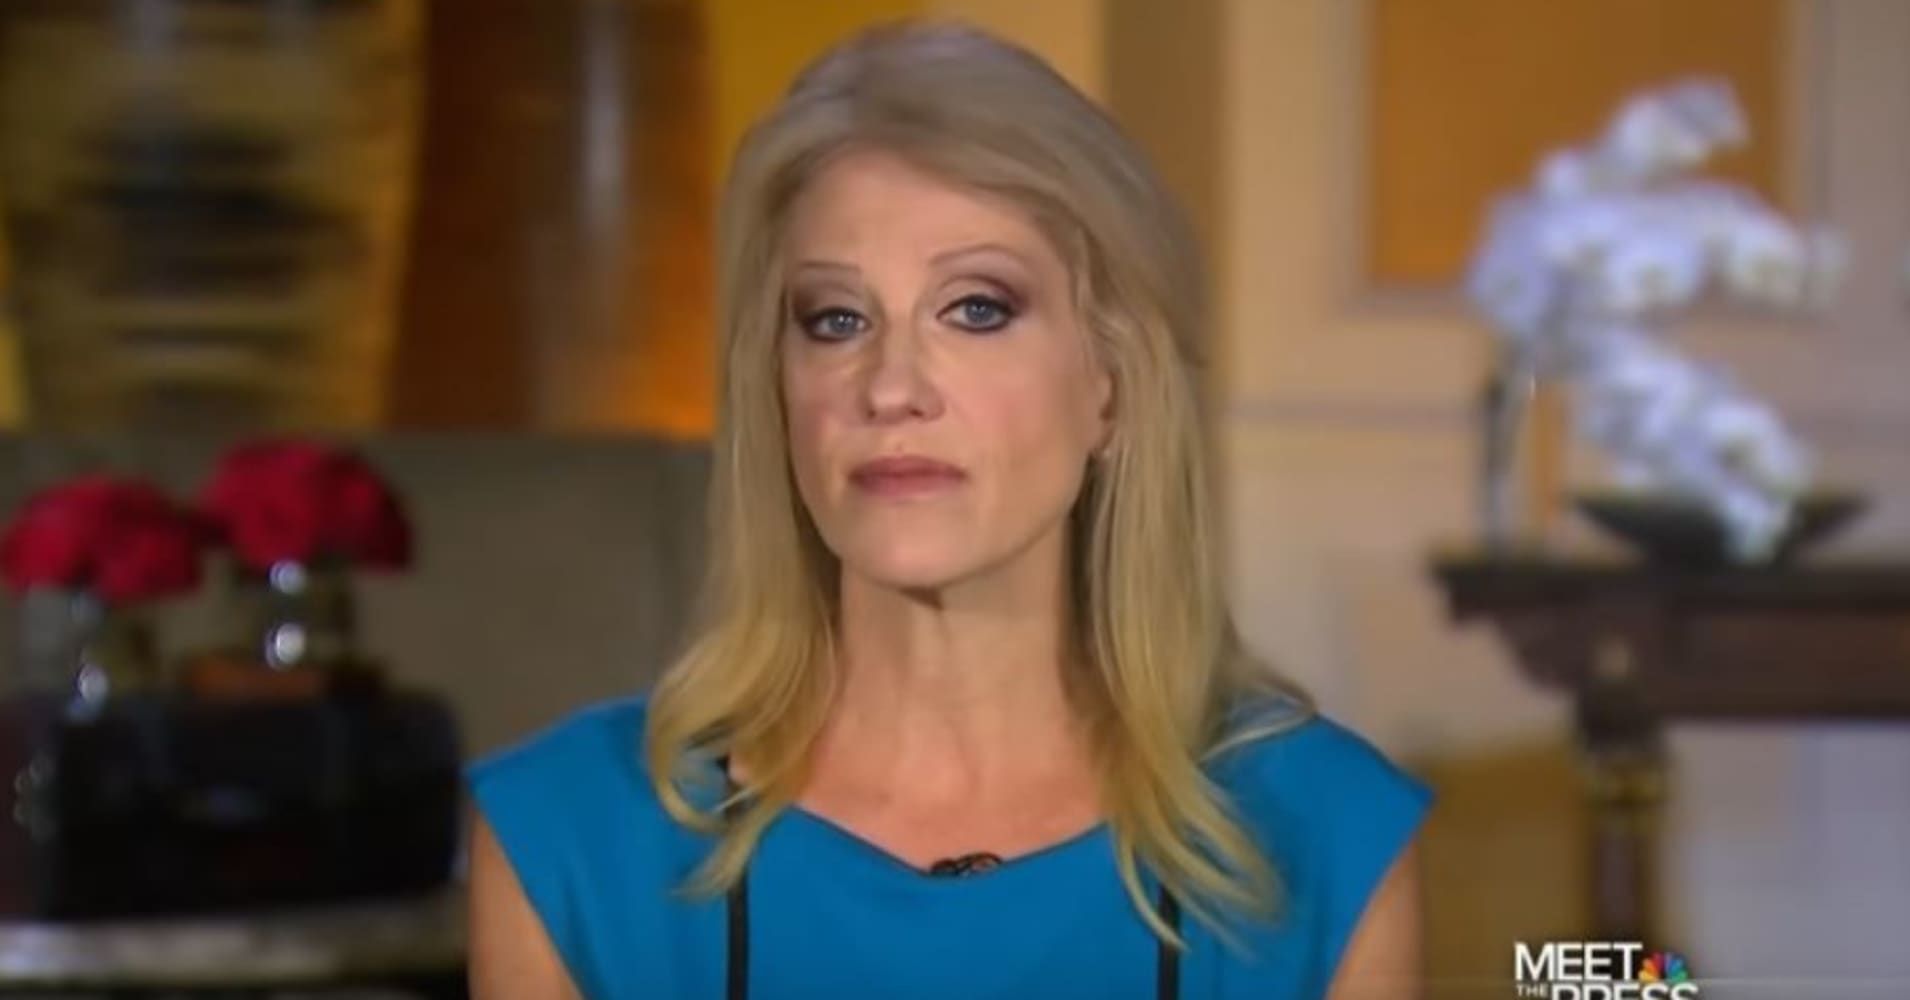 Trump 'furious' over Kellyanne Conway comments on Sunday shows about Romney: Sources1910 x 1000